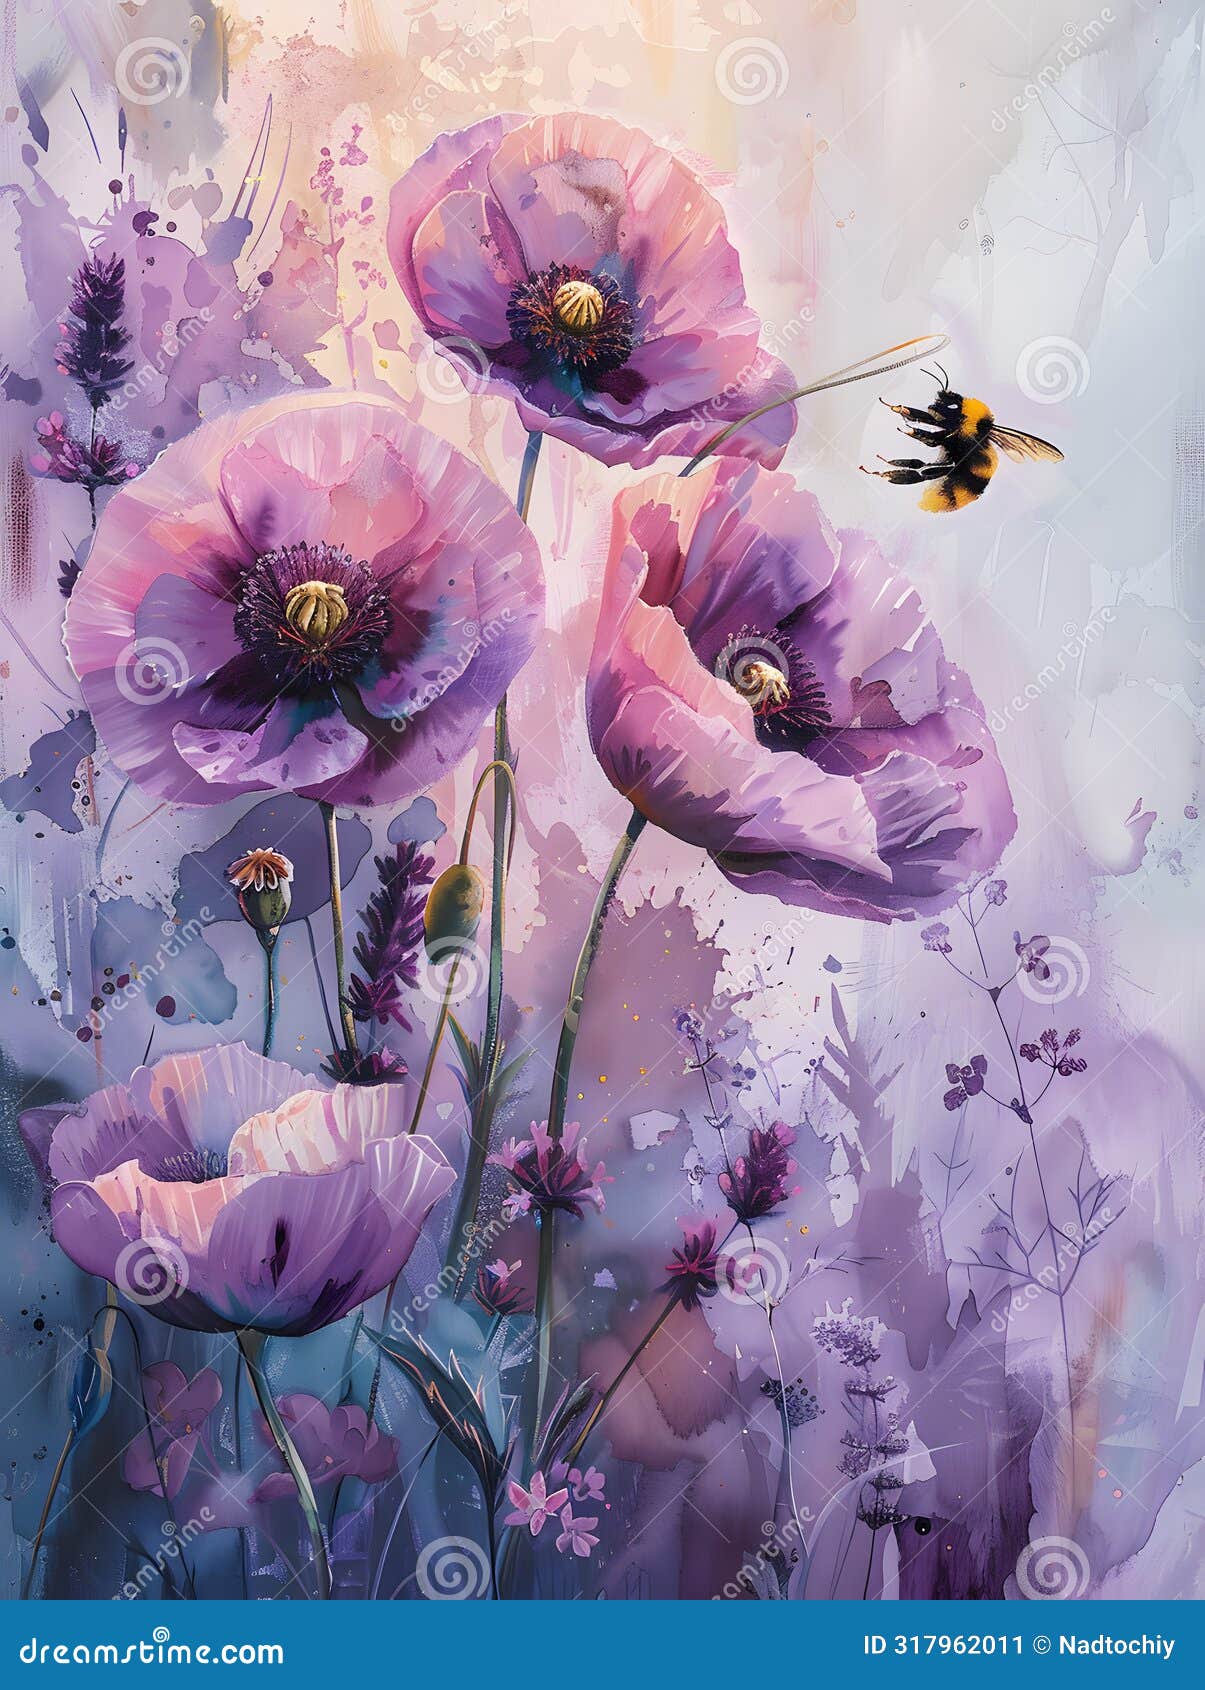 violet flowers painted with a bee, pollinator artwork